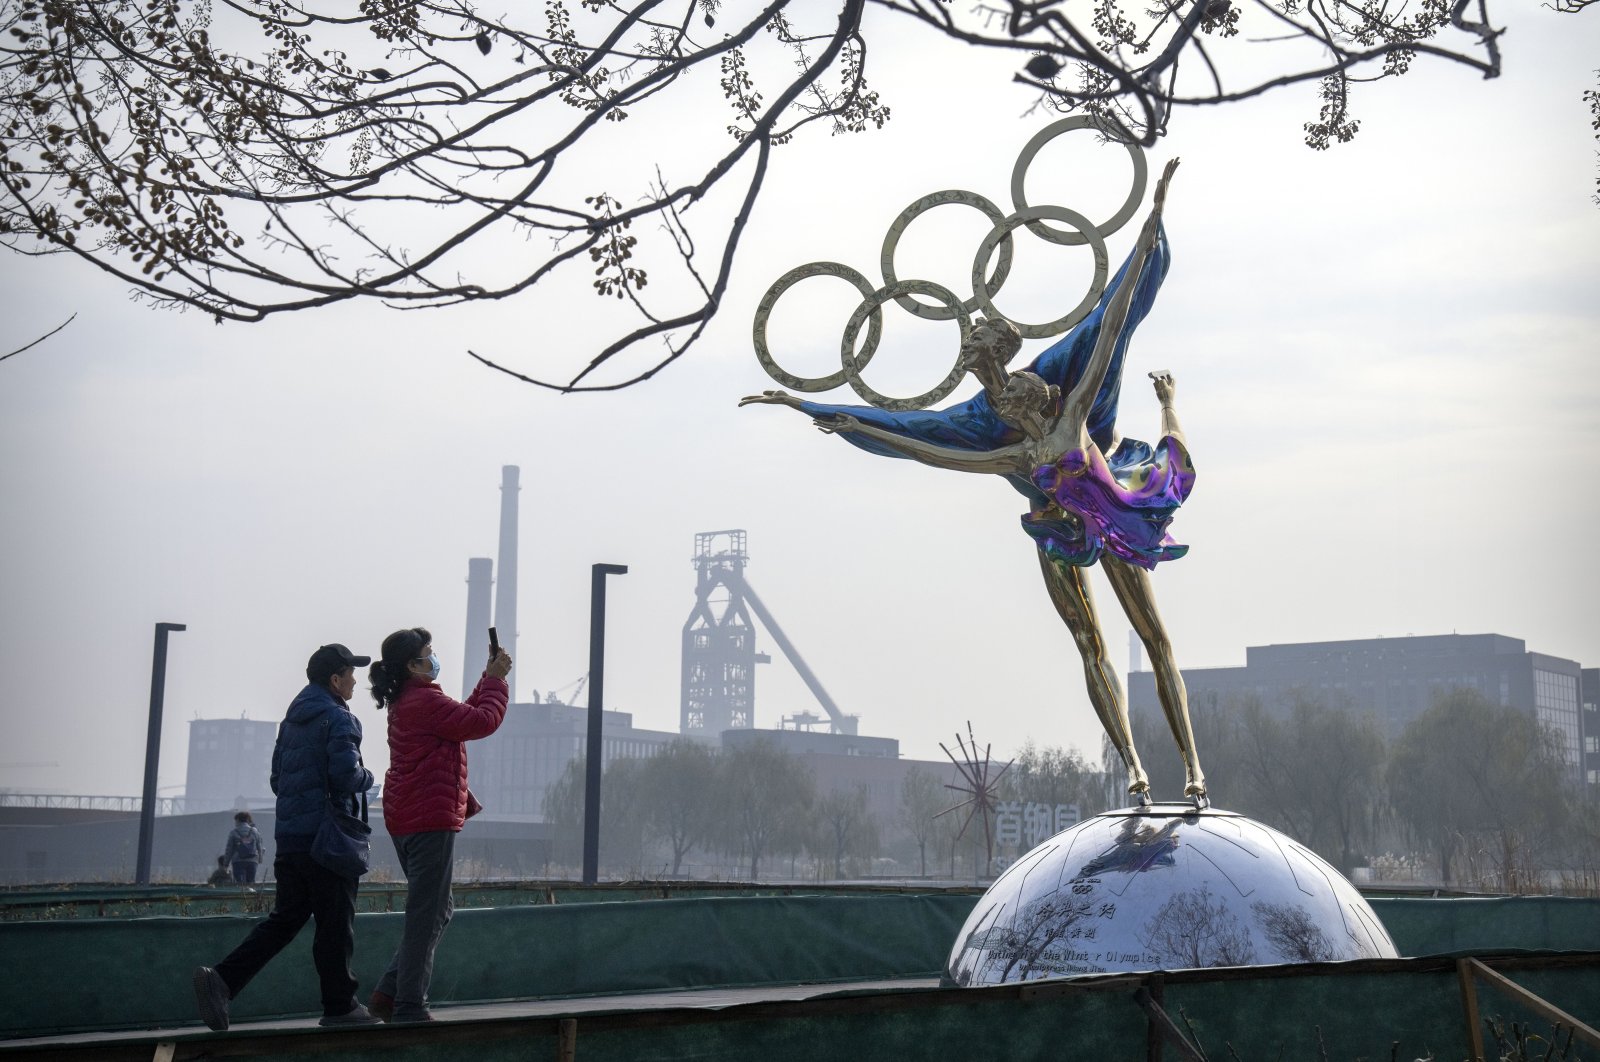 Visitors take photos of a statue of figure skaters with the Olympic rings at a park near the headquarters of the Beijing Organizing Committee for the Olympic Games (BOCOG) in Beijing, China, Nov. 18, 2021. (AP Photo)